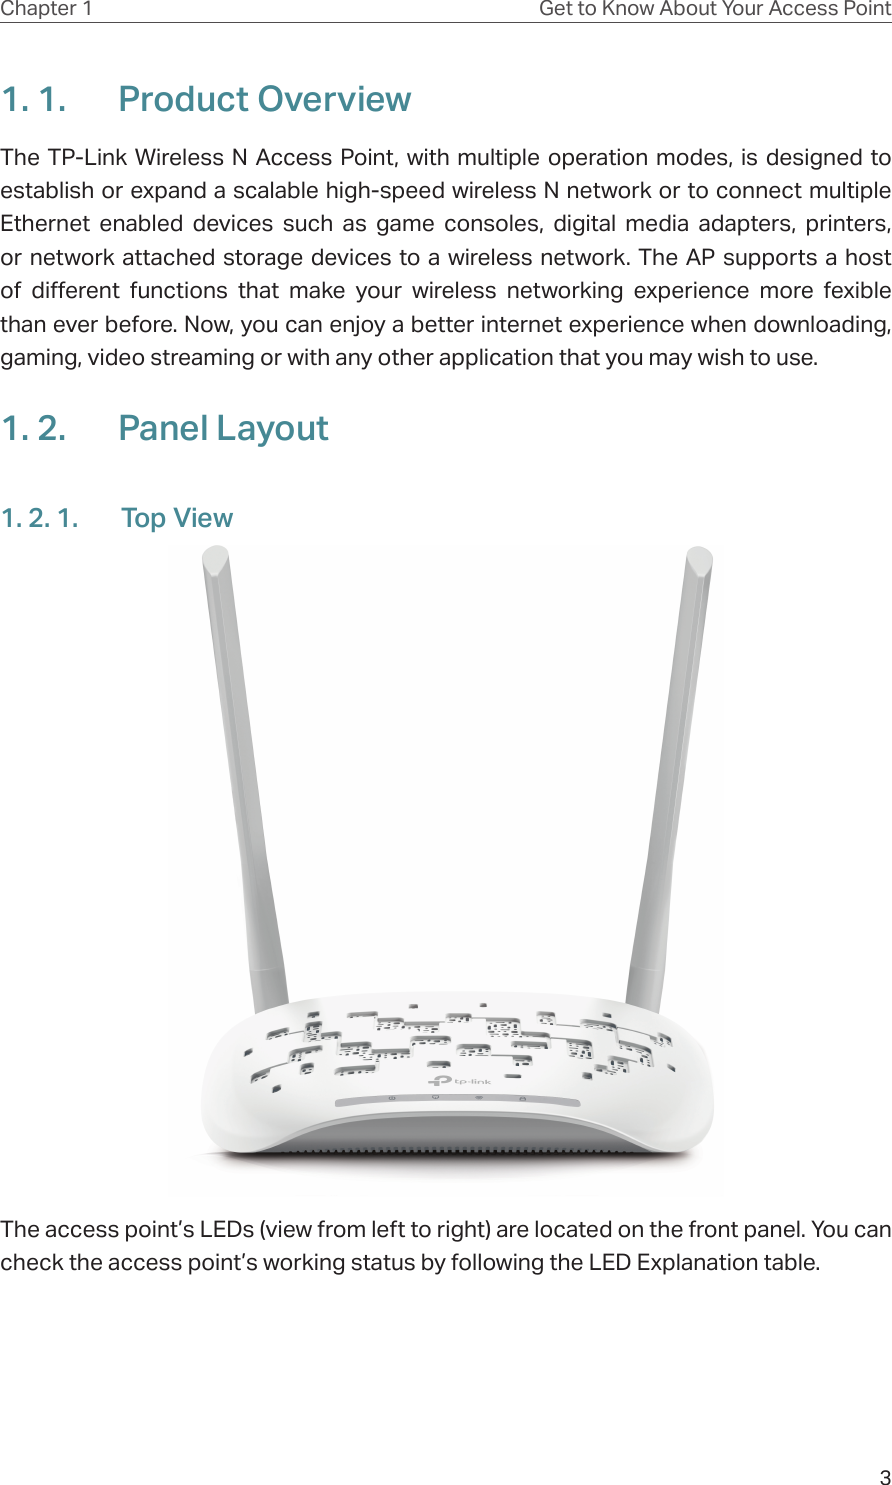 3Chapter 1 Get to Know About Your Access Point1. 1.  Product OverviewThe TP-Link Wireless N Access Point, with multiple operation modes, is designed to establish or expand a scalable high-speed wireless N network or to connect multiple Ethernet enabled devices such as game consoles, digital media adapters, printers, or network attached storage devices to a wireless network. The AP supports a host of different functions that make your wireless networking experience more fexible than ever before. Now, you can enjoy a better internet experience when downloading, gaming, video streaming or with any other application that you may wish to use.1. 2.  Panel Layout1. 2. 1.  Top ViewThe access point’s LEDs (view from left to right) are located on the front panel. You can check the access point’s working status by following the LED Explanation table.